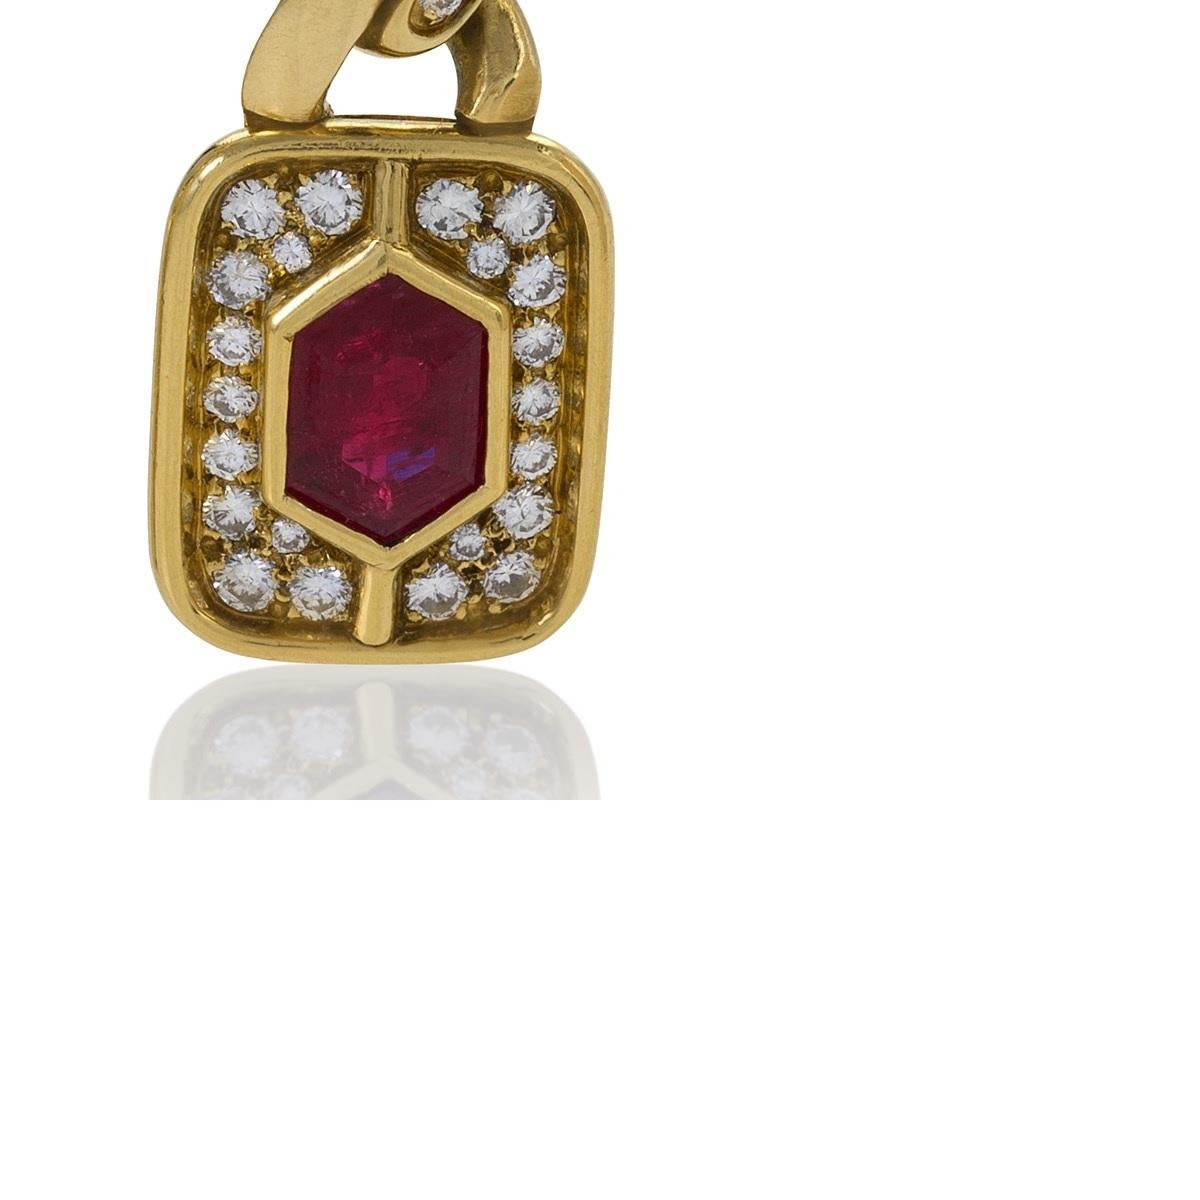 A pair of Italian late-20th century 18 karat gold earrings with rubies and diamonds by Bulgari. Both the elegantly petite tops and the substantial drops of these earrings feature a hexagonal ruby of exceptional color framed by two plaques of